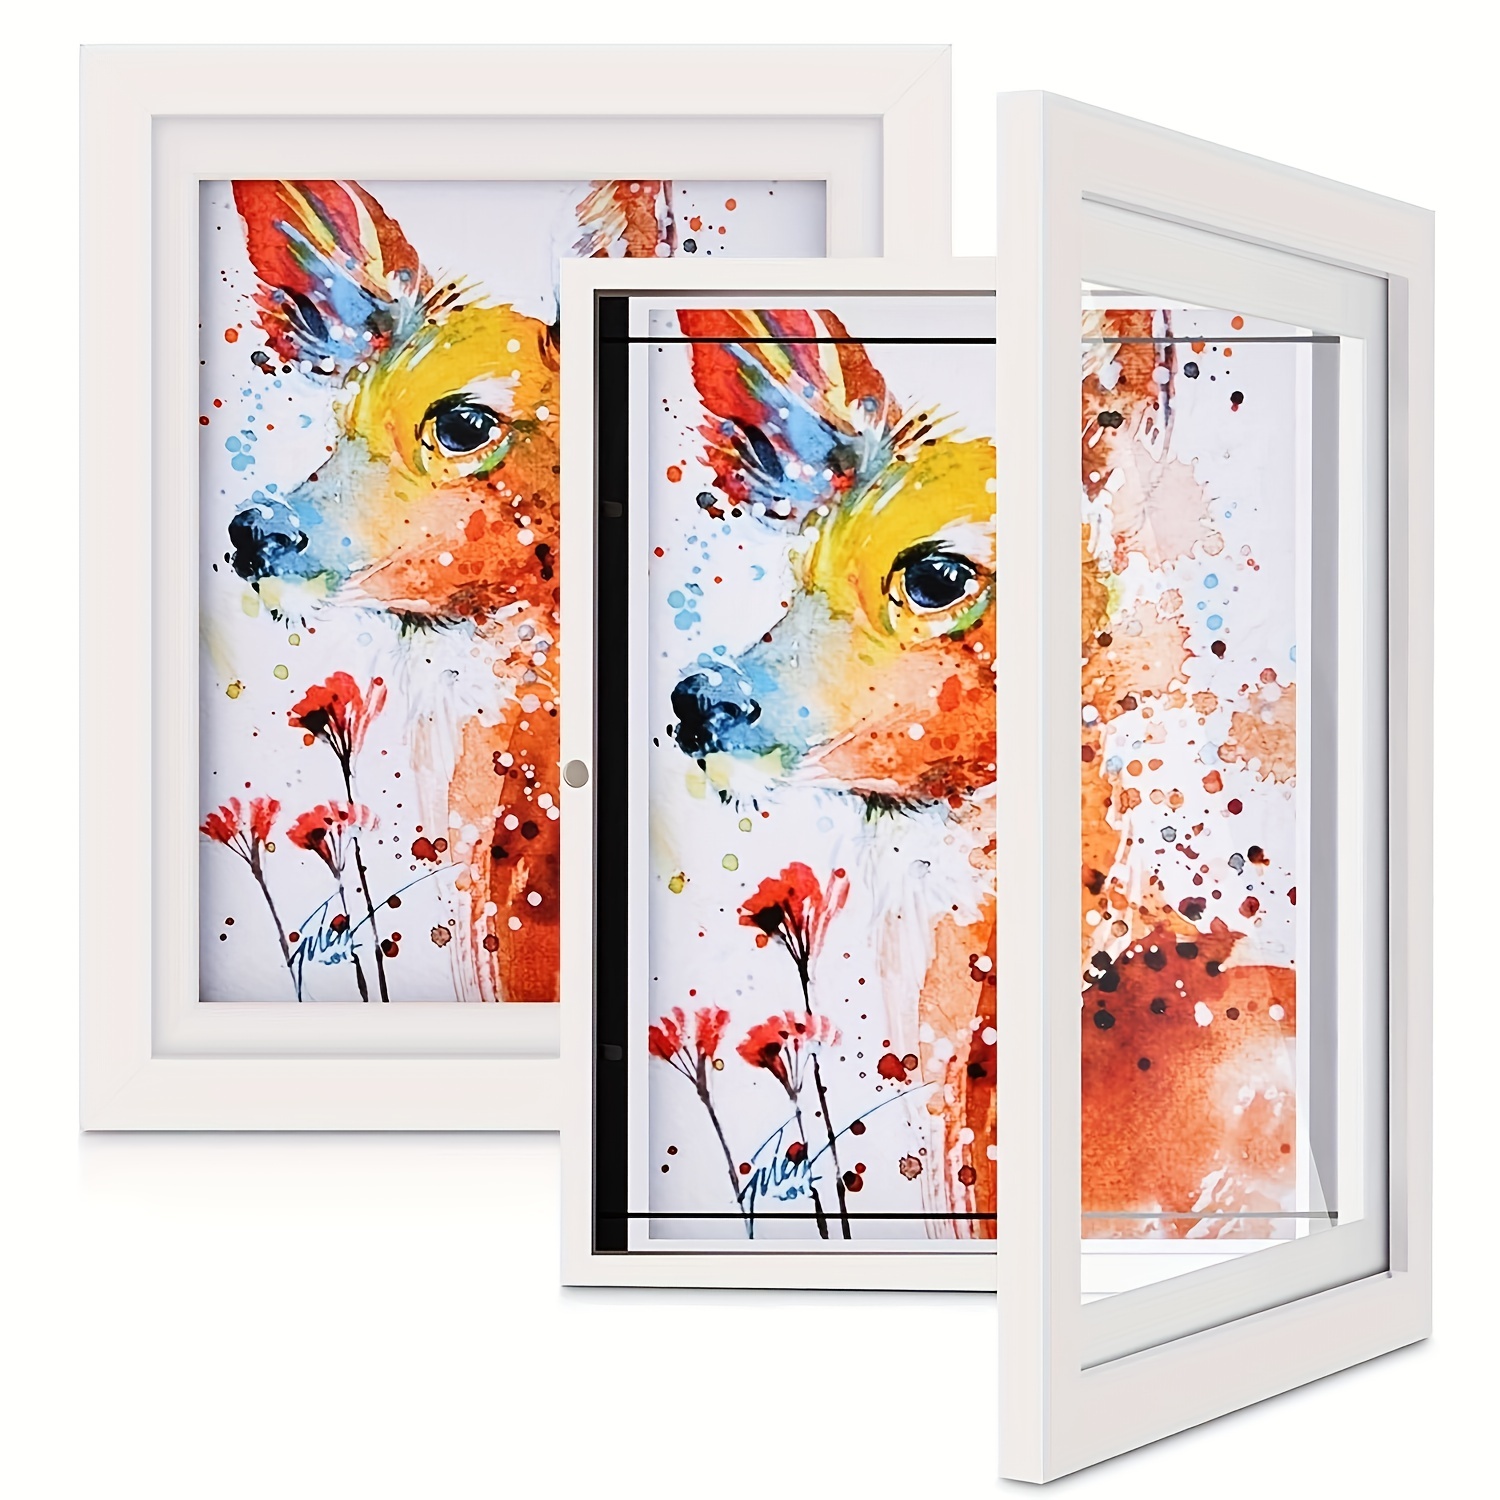 

2pcs Artwork Picture Frame Display With Mat Or Without Mat, Wood Frame With Tempered Glass Front Opening For Drawings, Artworks, Art Projects, Schoolwork, White/black